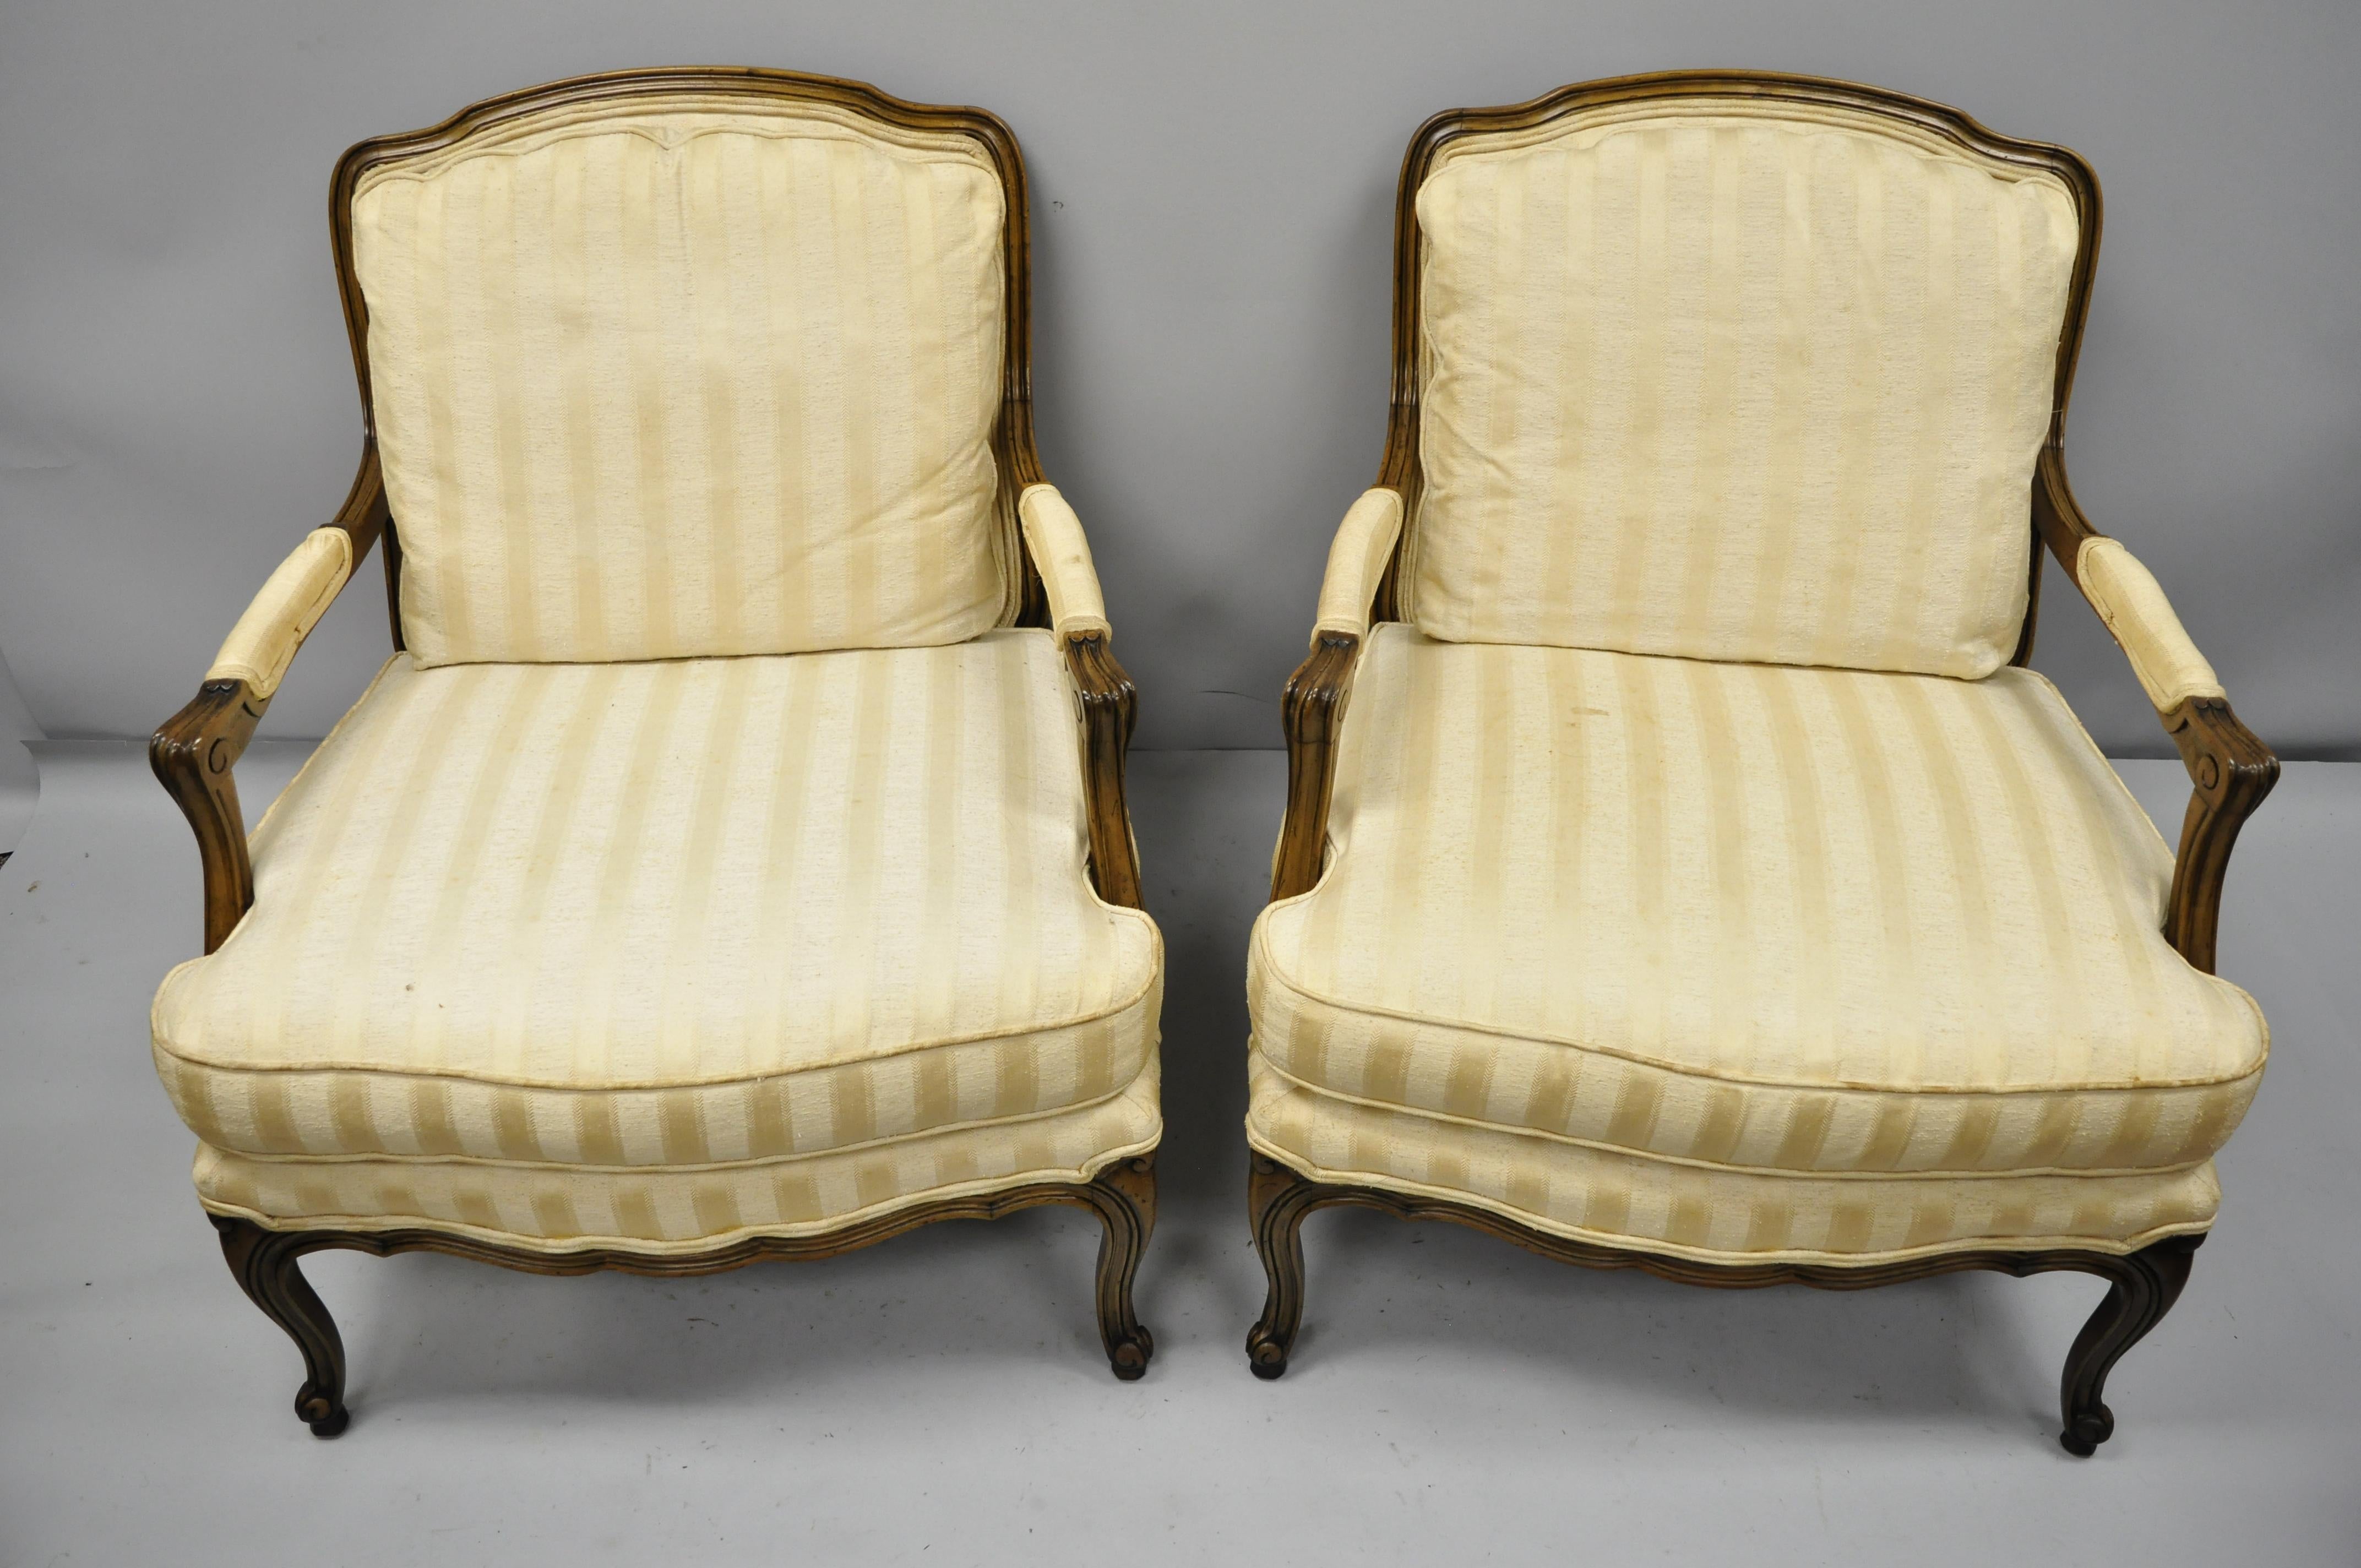 Pair of Baker French Country Provincial Louis XV style bergère armchairs. Item features nice wide seats, tight sturdy frames, solid wood construction, distressed finish, original label, cabriole legs, and quality American craftsmanship. Mid-20th